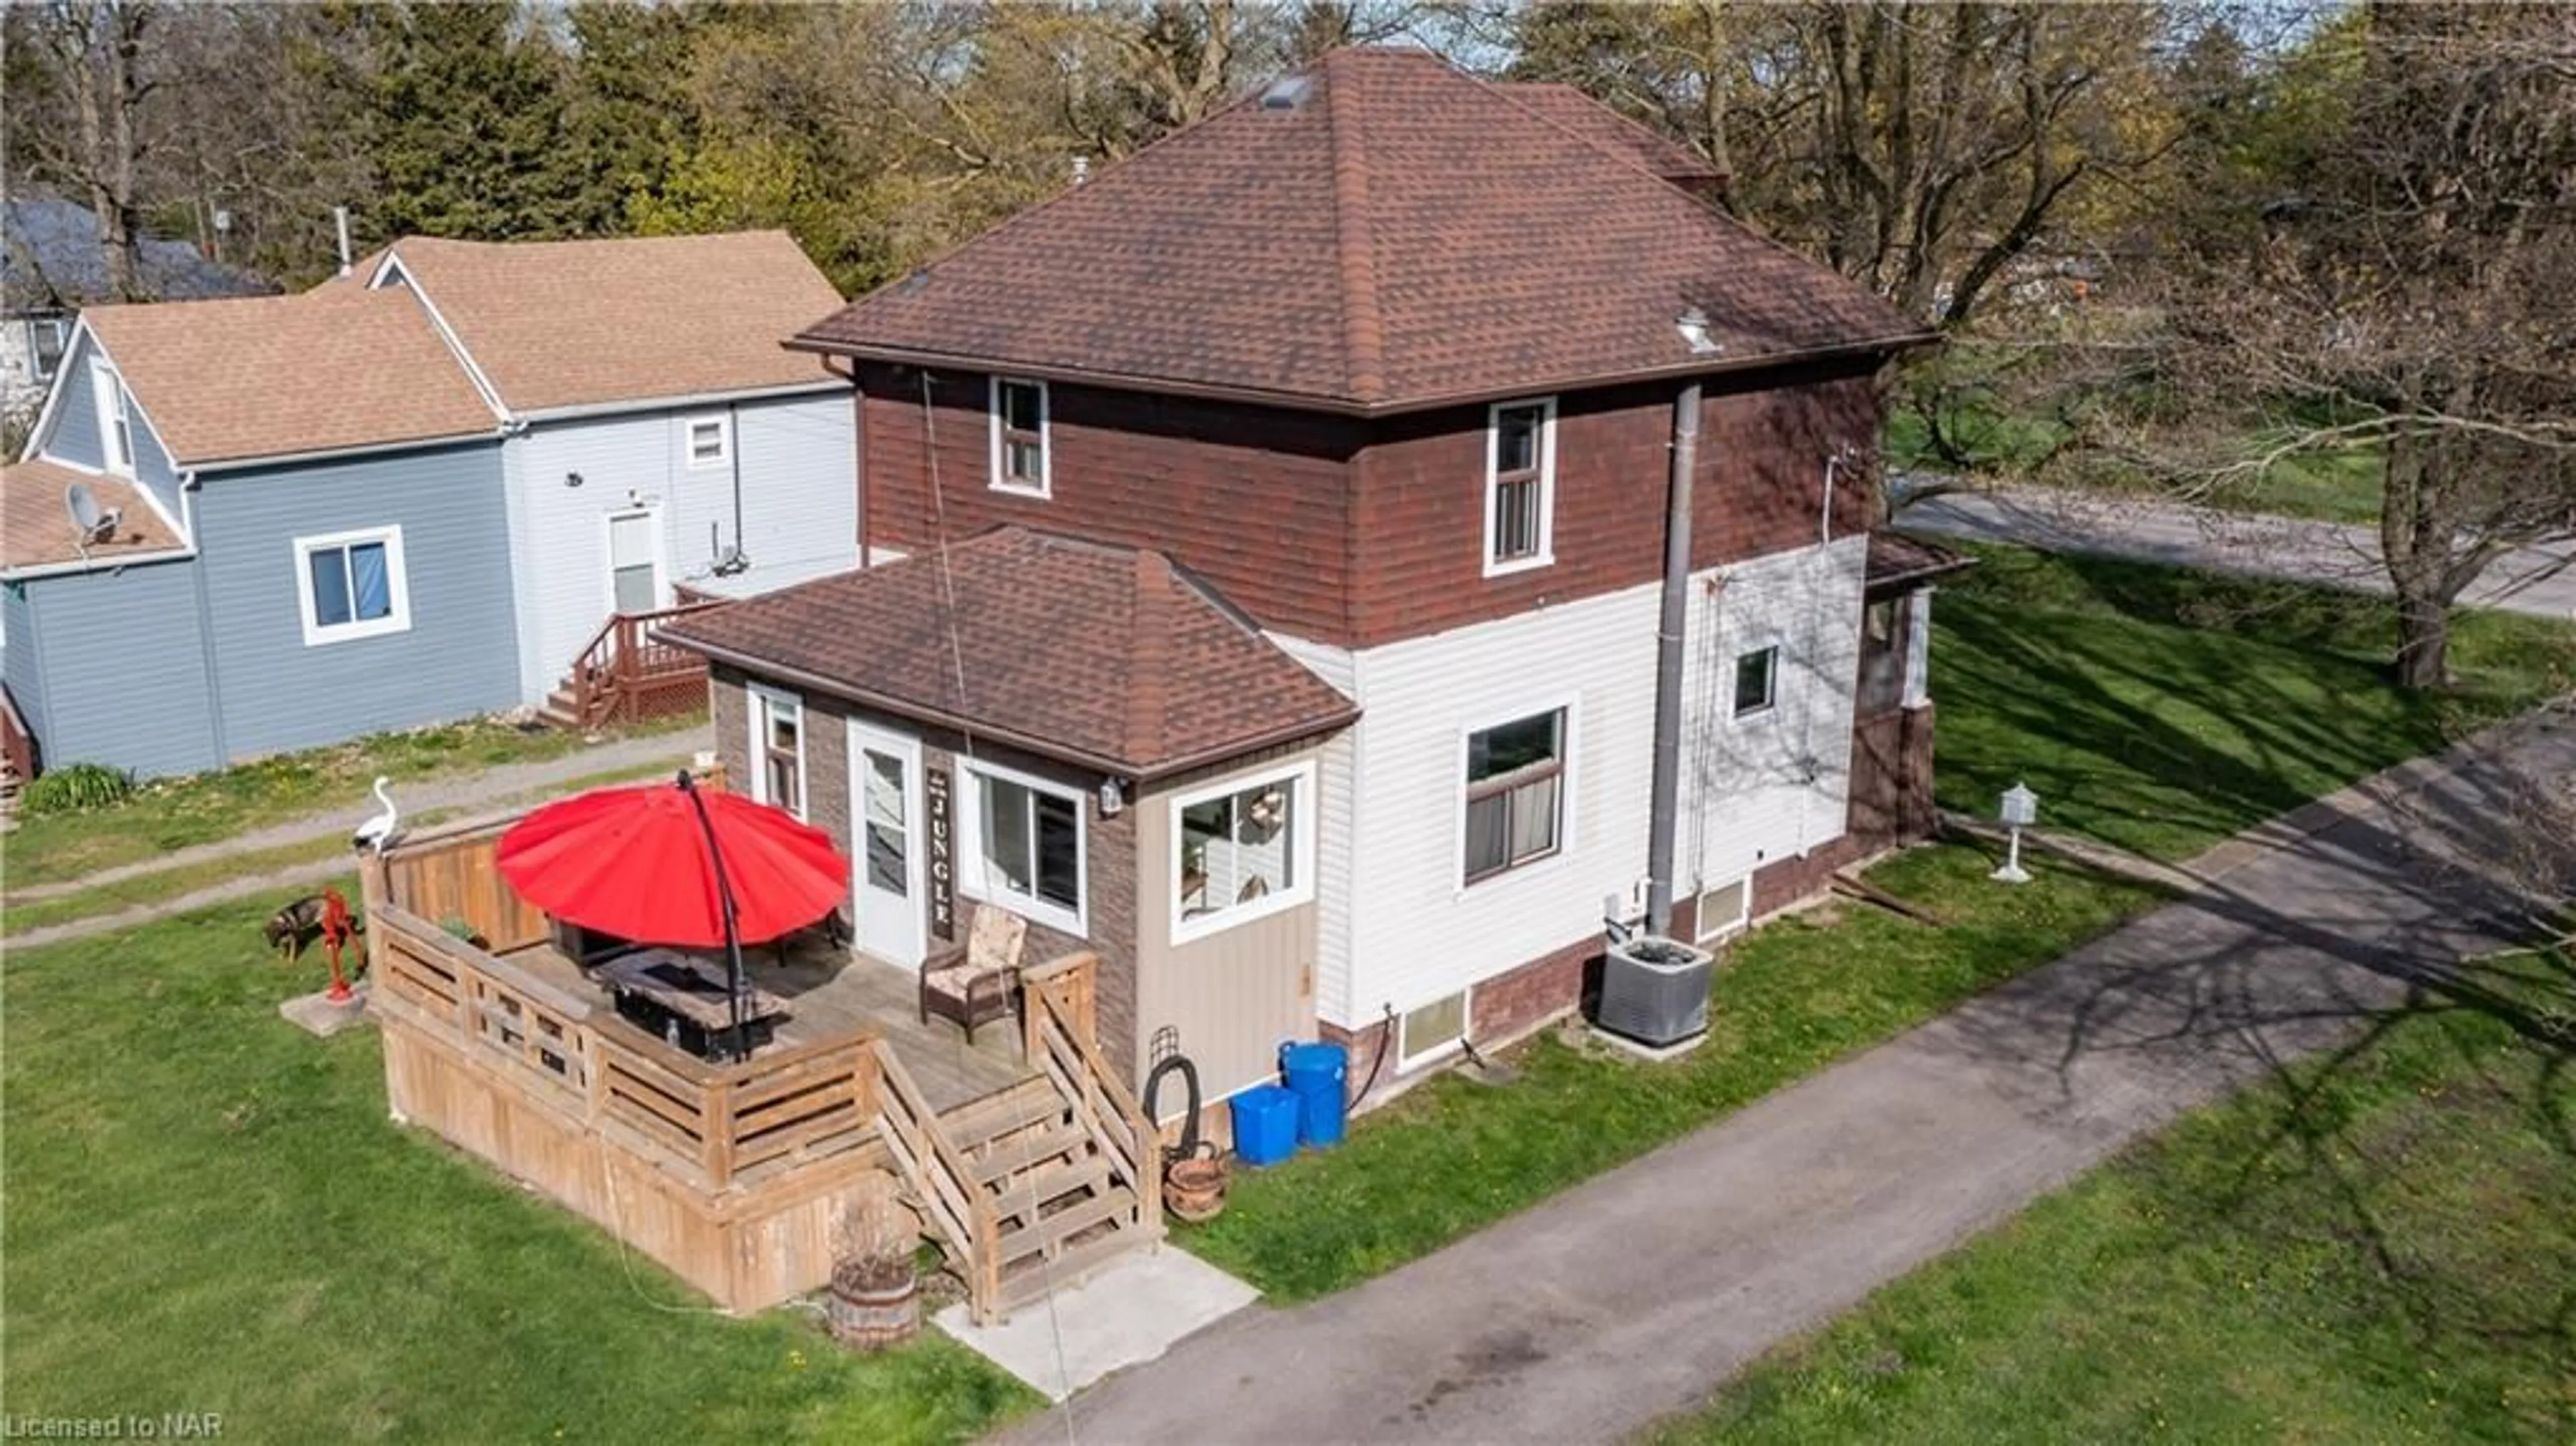 Frontside or backside of a home for 220 Chippawa Rd, Port Colborne Ontario L3K 1T7